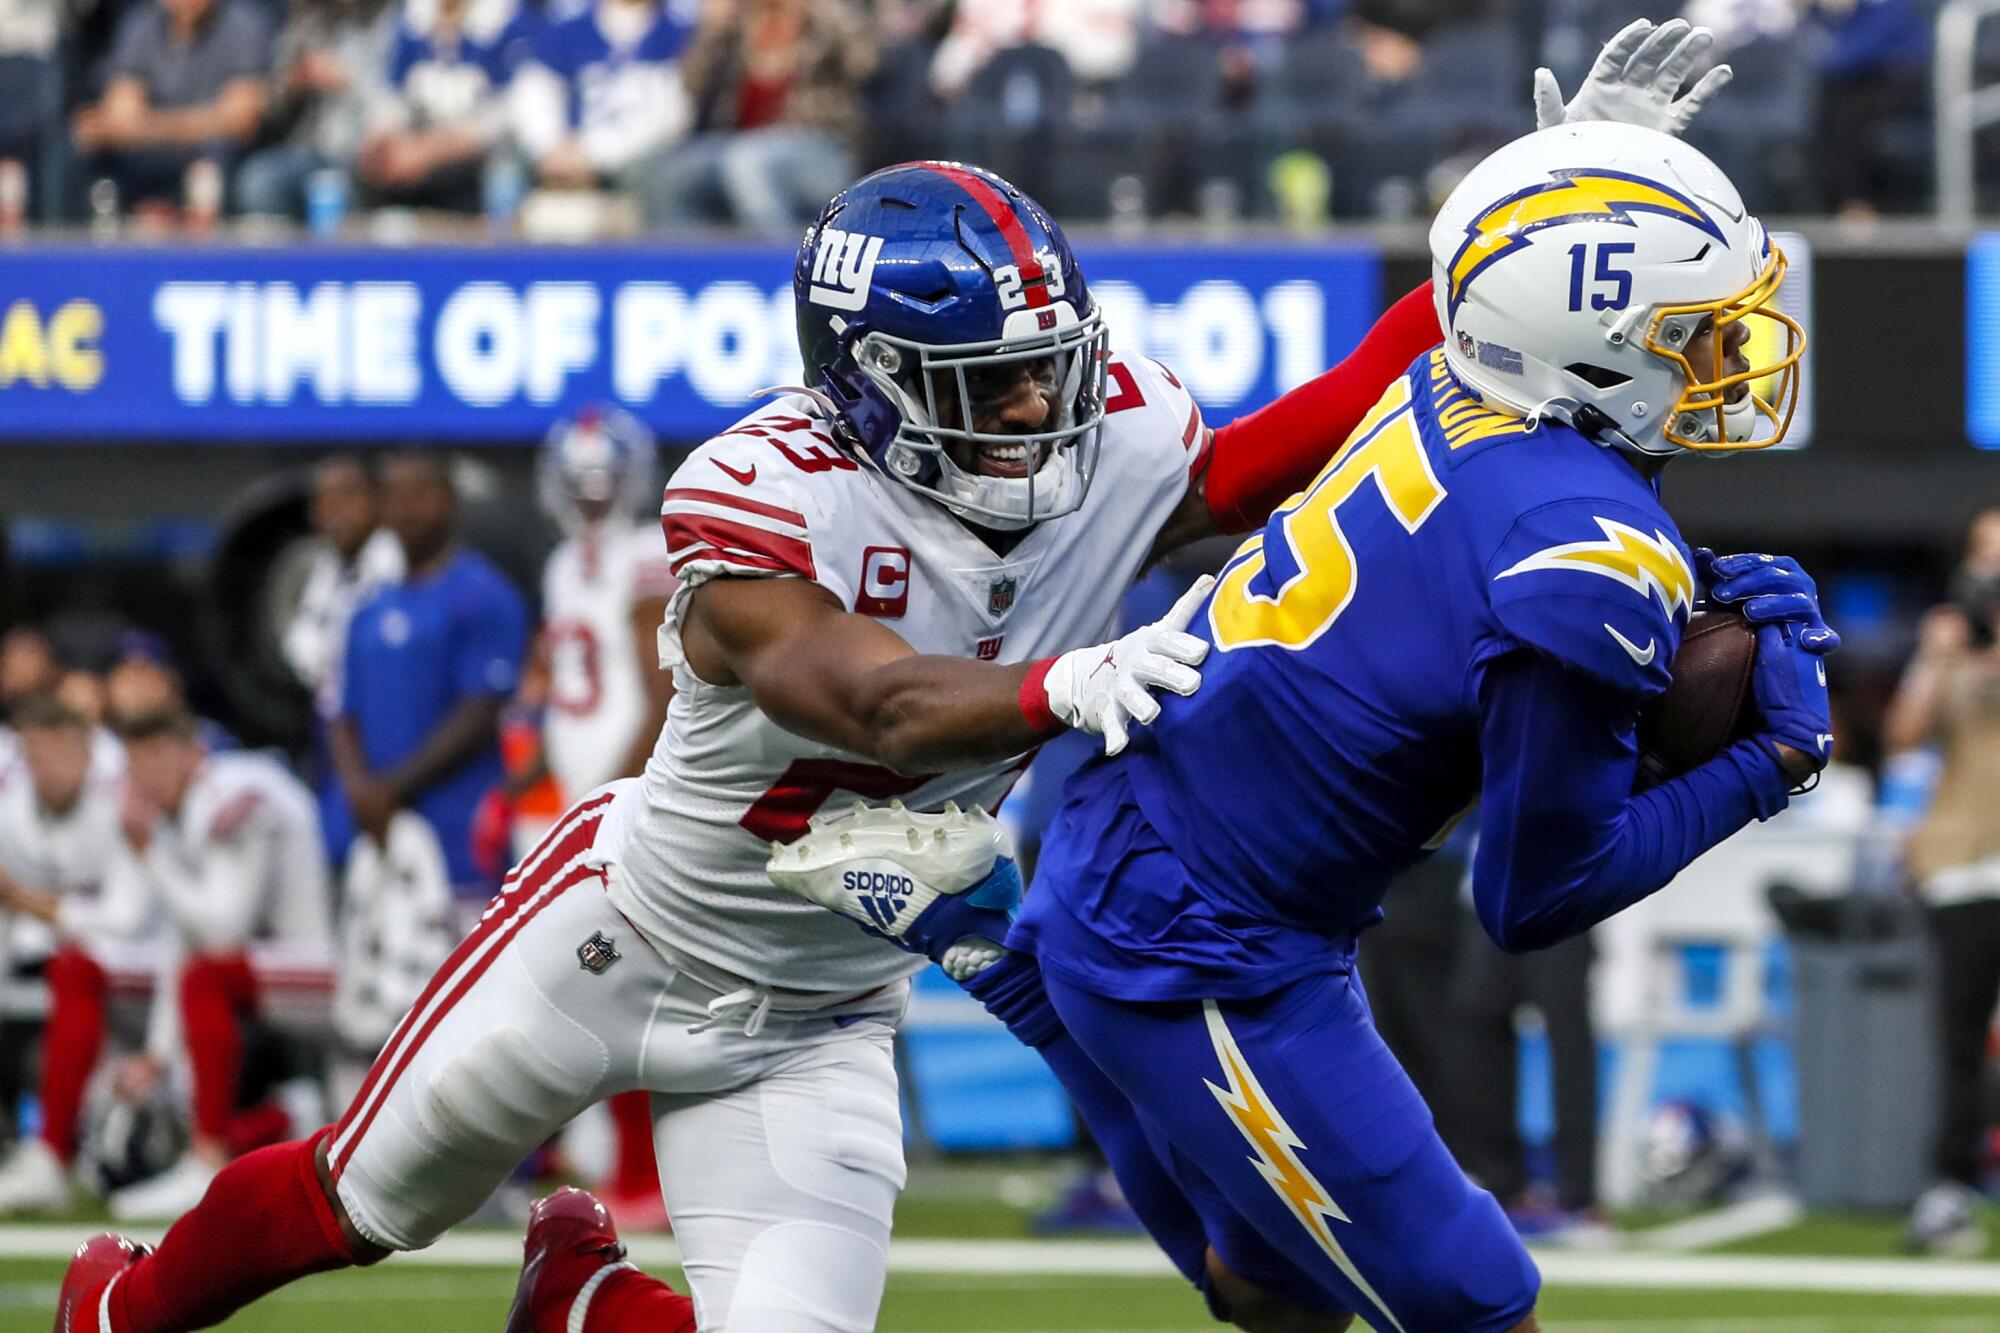 Chargers wide receiver Jalen Guyton hauls in a 59-yard touchdown pass over New York Giants safety Logan Ryan.